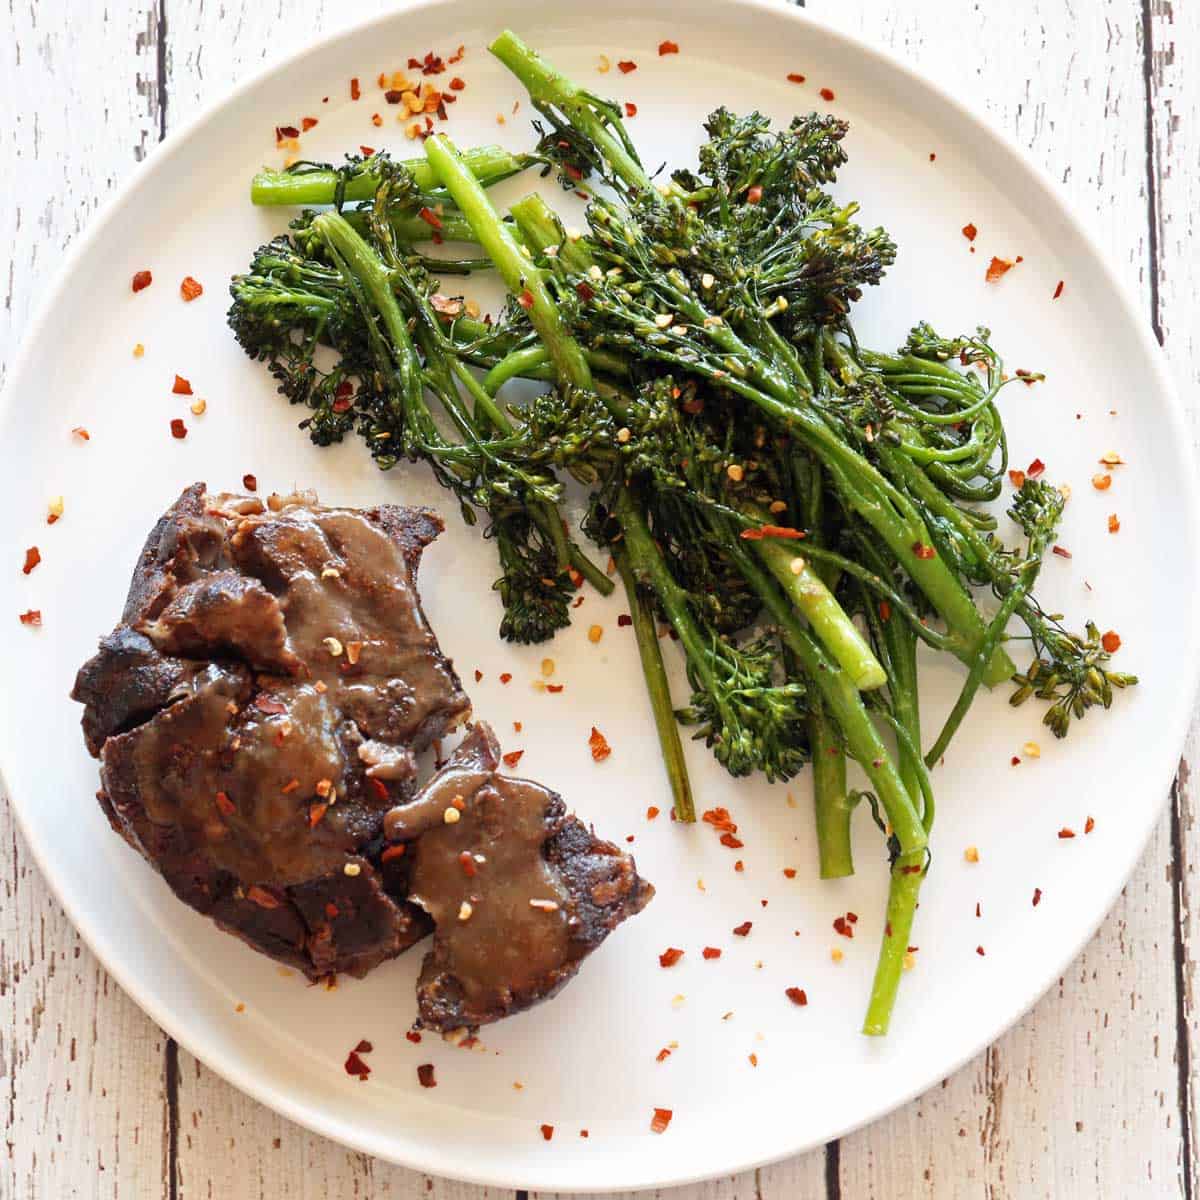 Roasted broccolini is served with beef shanks.